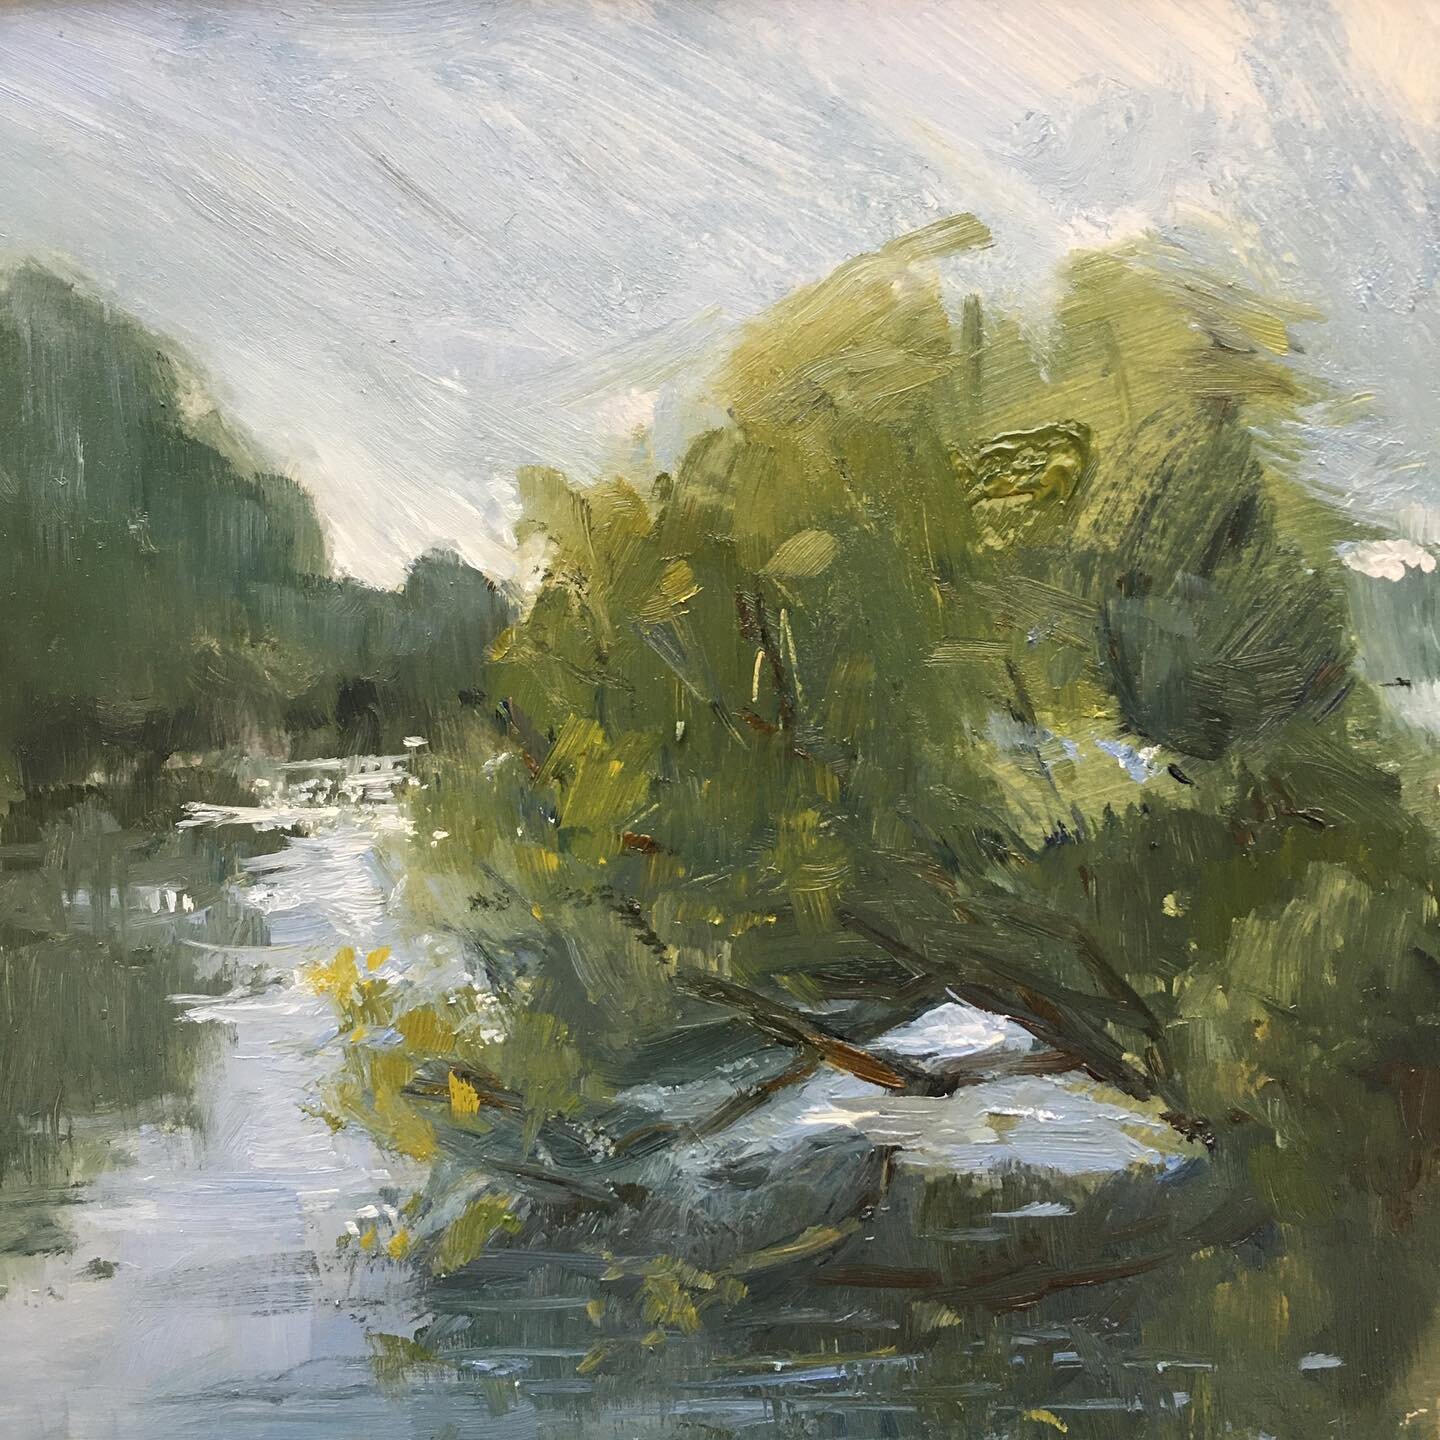 I got to do some #pleinairpainting at Lake Wheeler yesterday. Everyone was so nice! No humorous remarks to add to the book! 😅 Also, I watched #theboysintheboat movie last night and all those beautiful river images are still running through my head. 